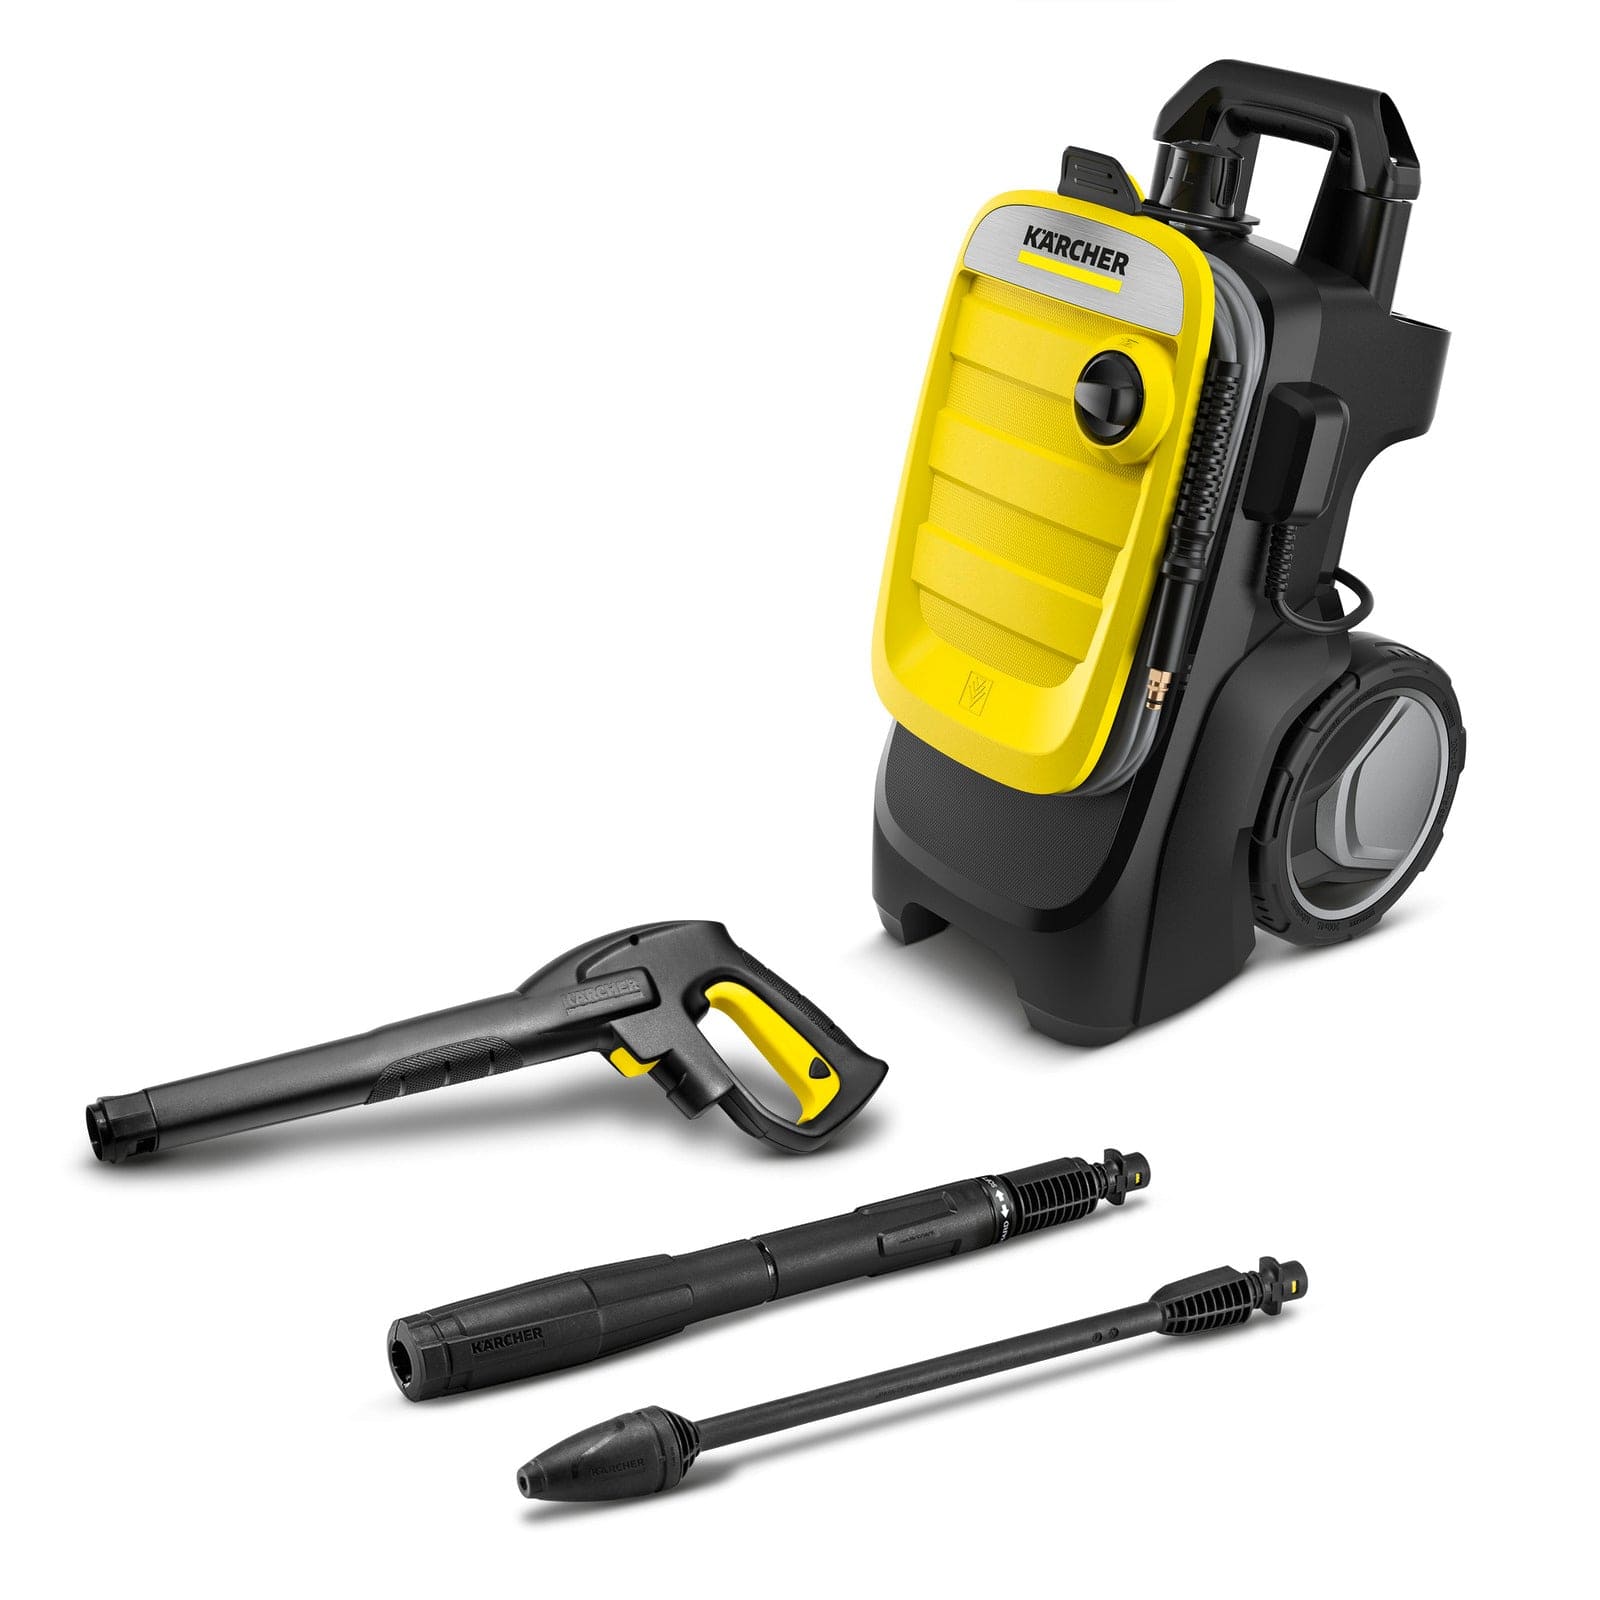 Karcher K7 Premium Full Control Plus Home Pressure Washer 180 Bar | Supply Master | Accra, Ghana Pressure Washer Buy Tools hardware Building materials